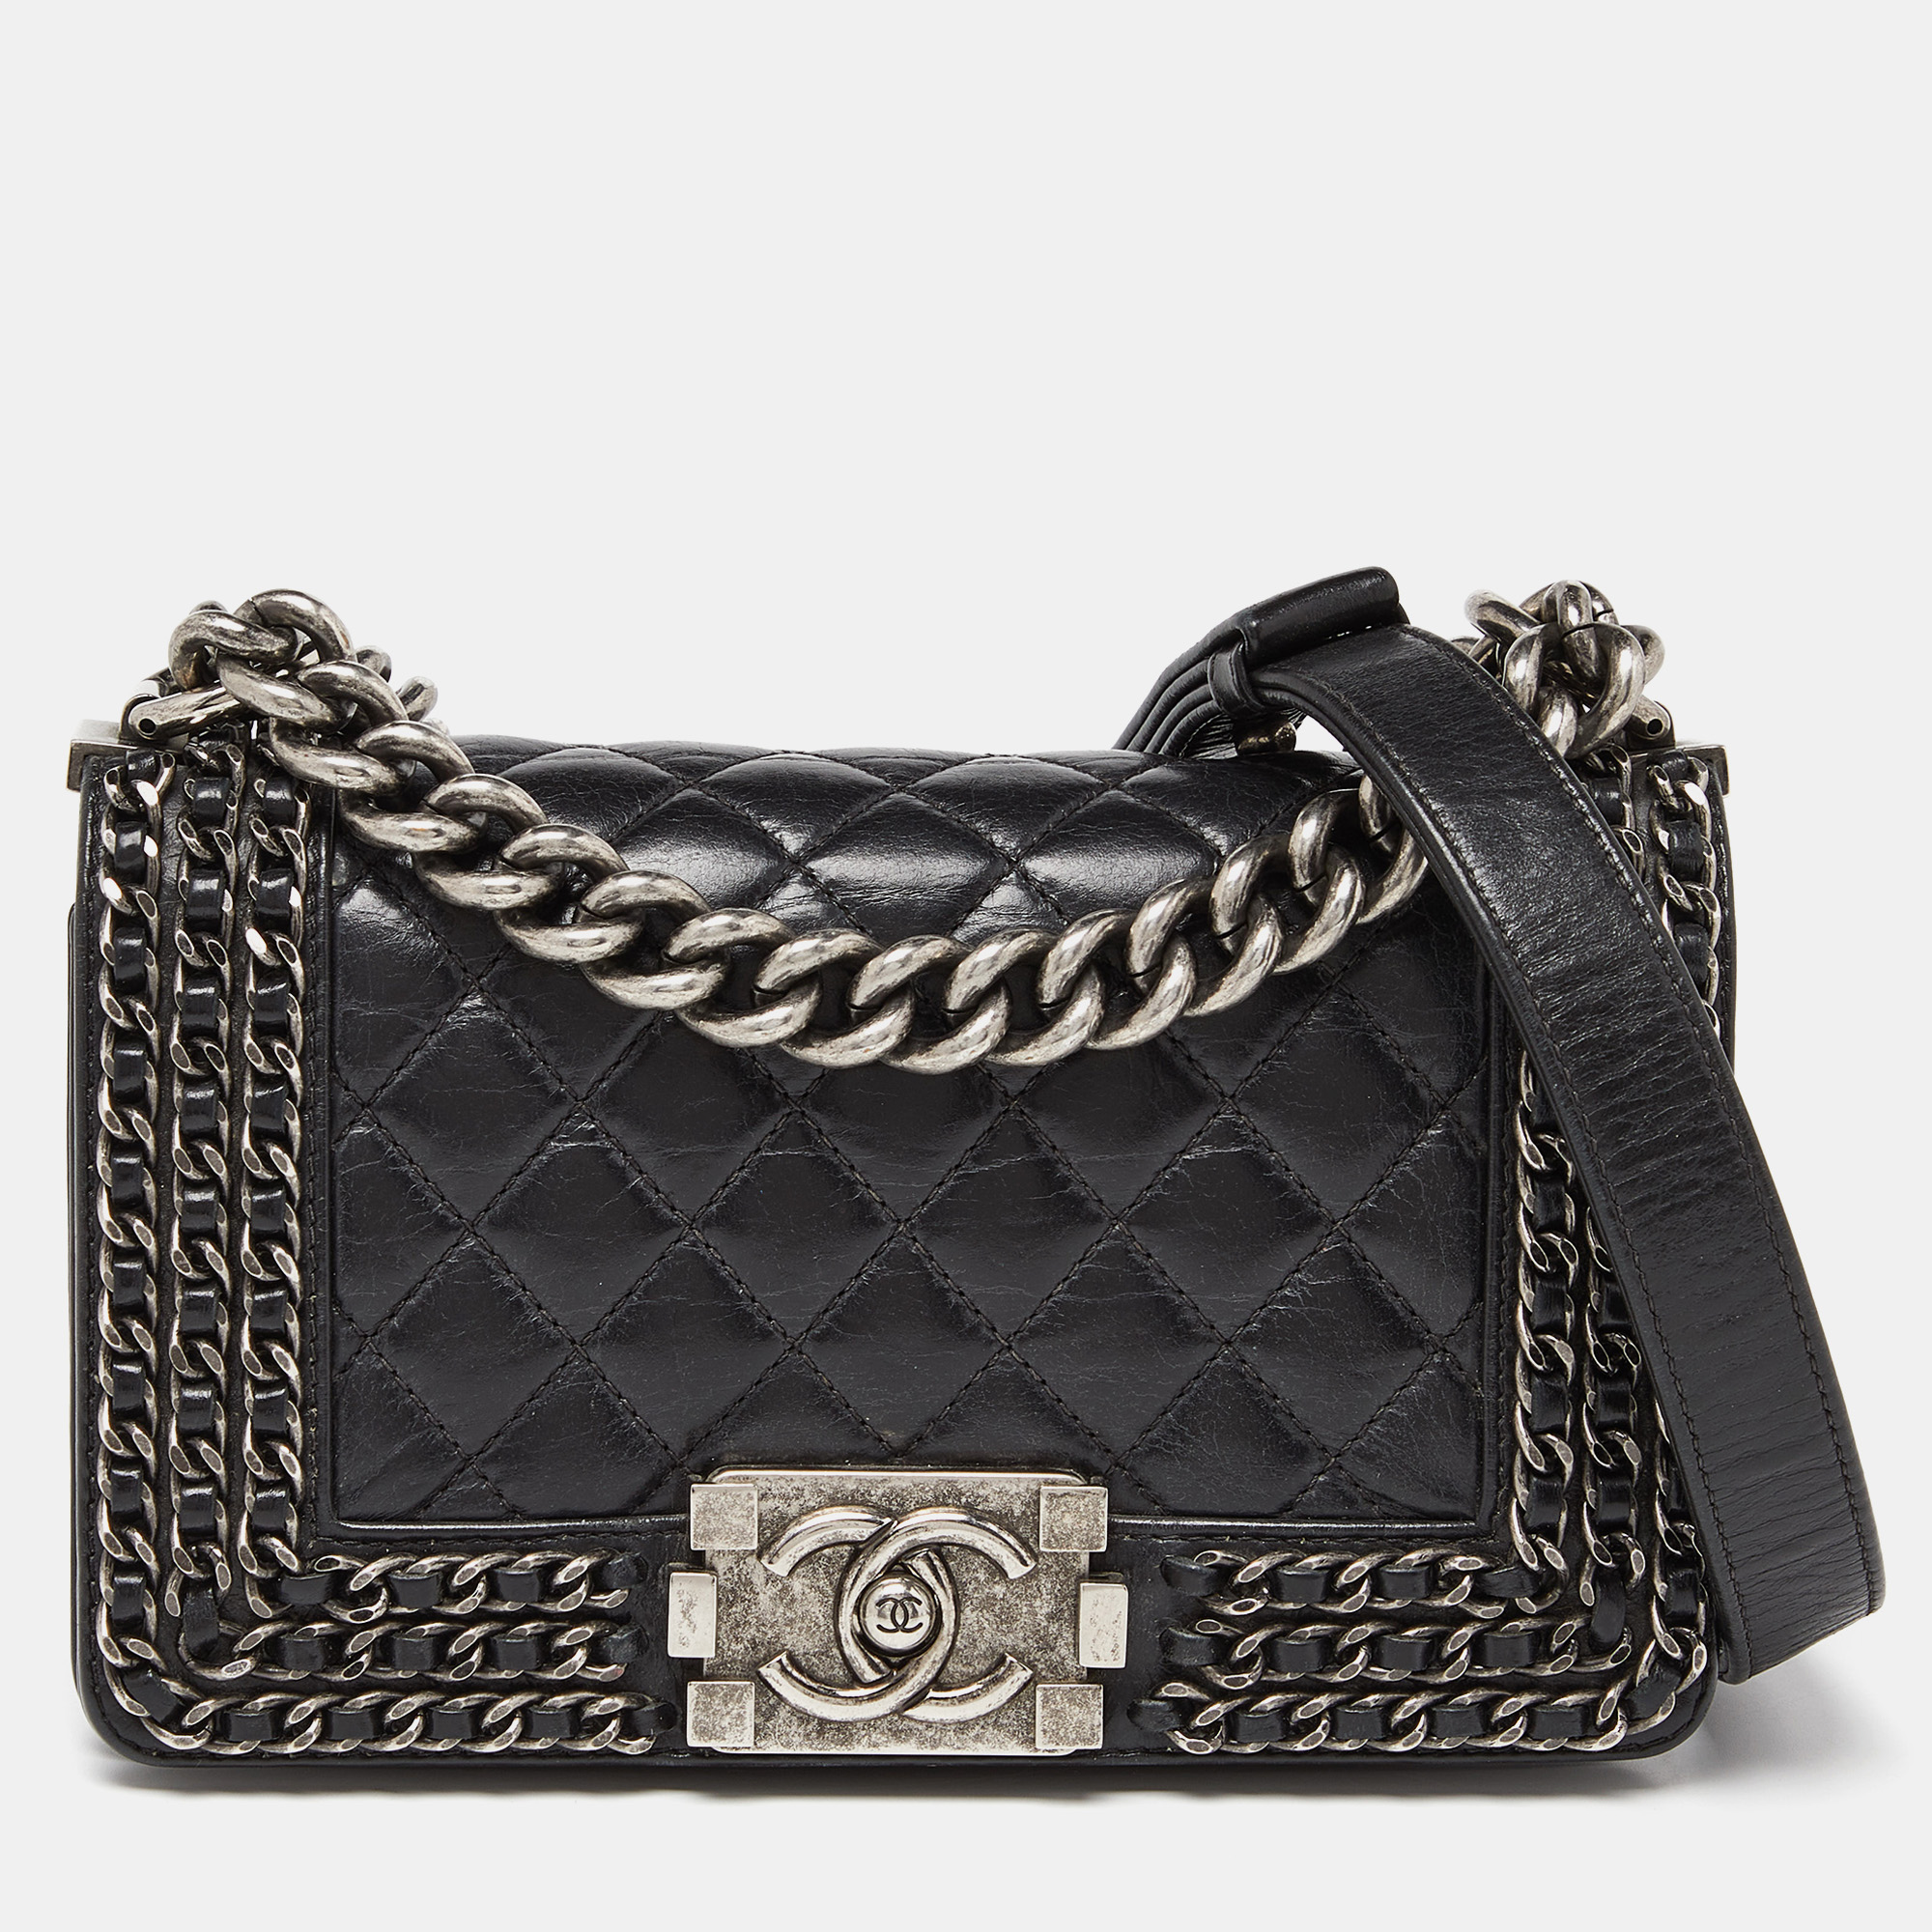 Pre-owned Chanel Black Quilted Leather Small Boy Chained Flap Bag